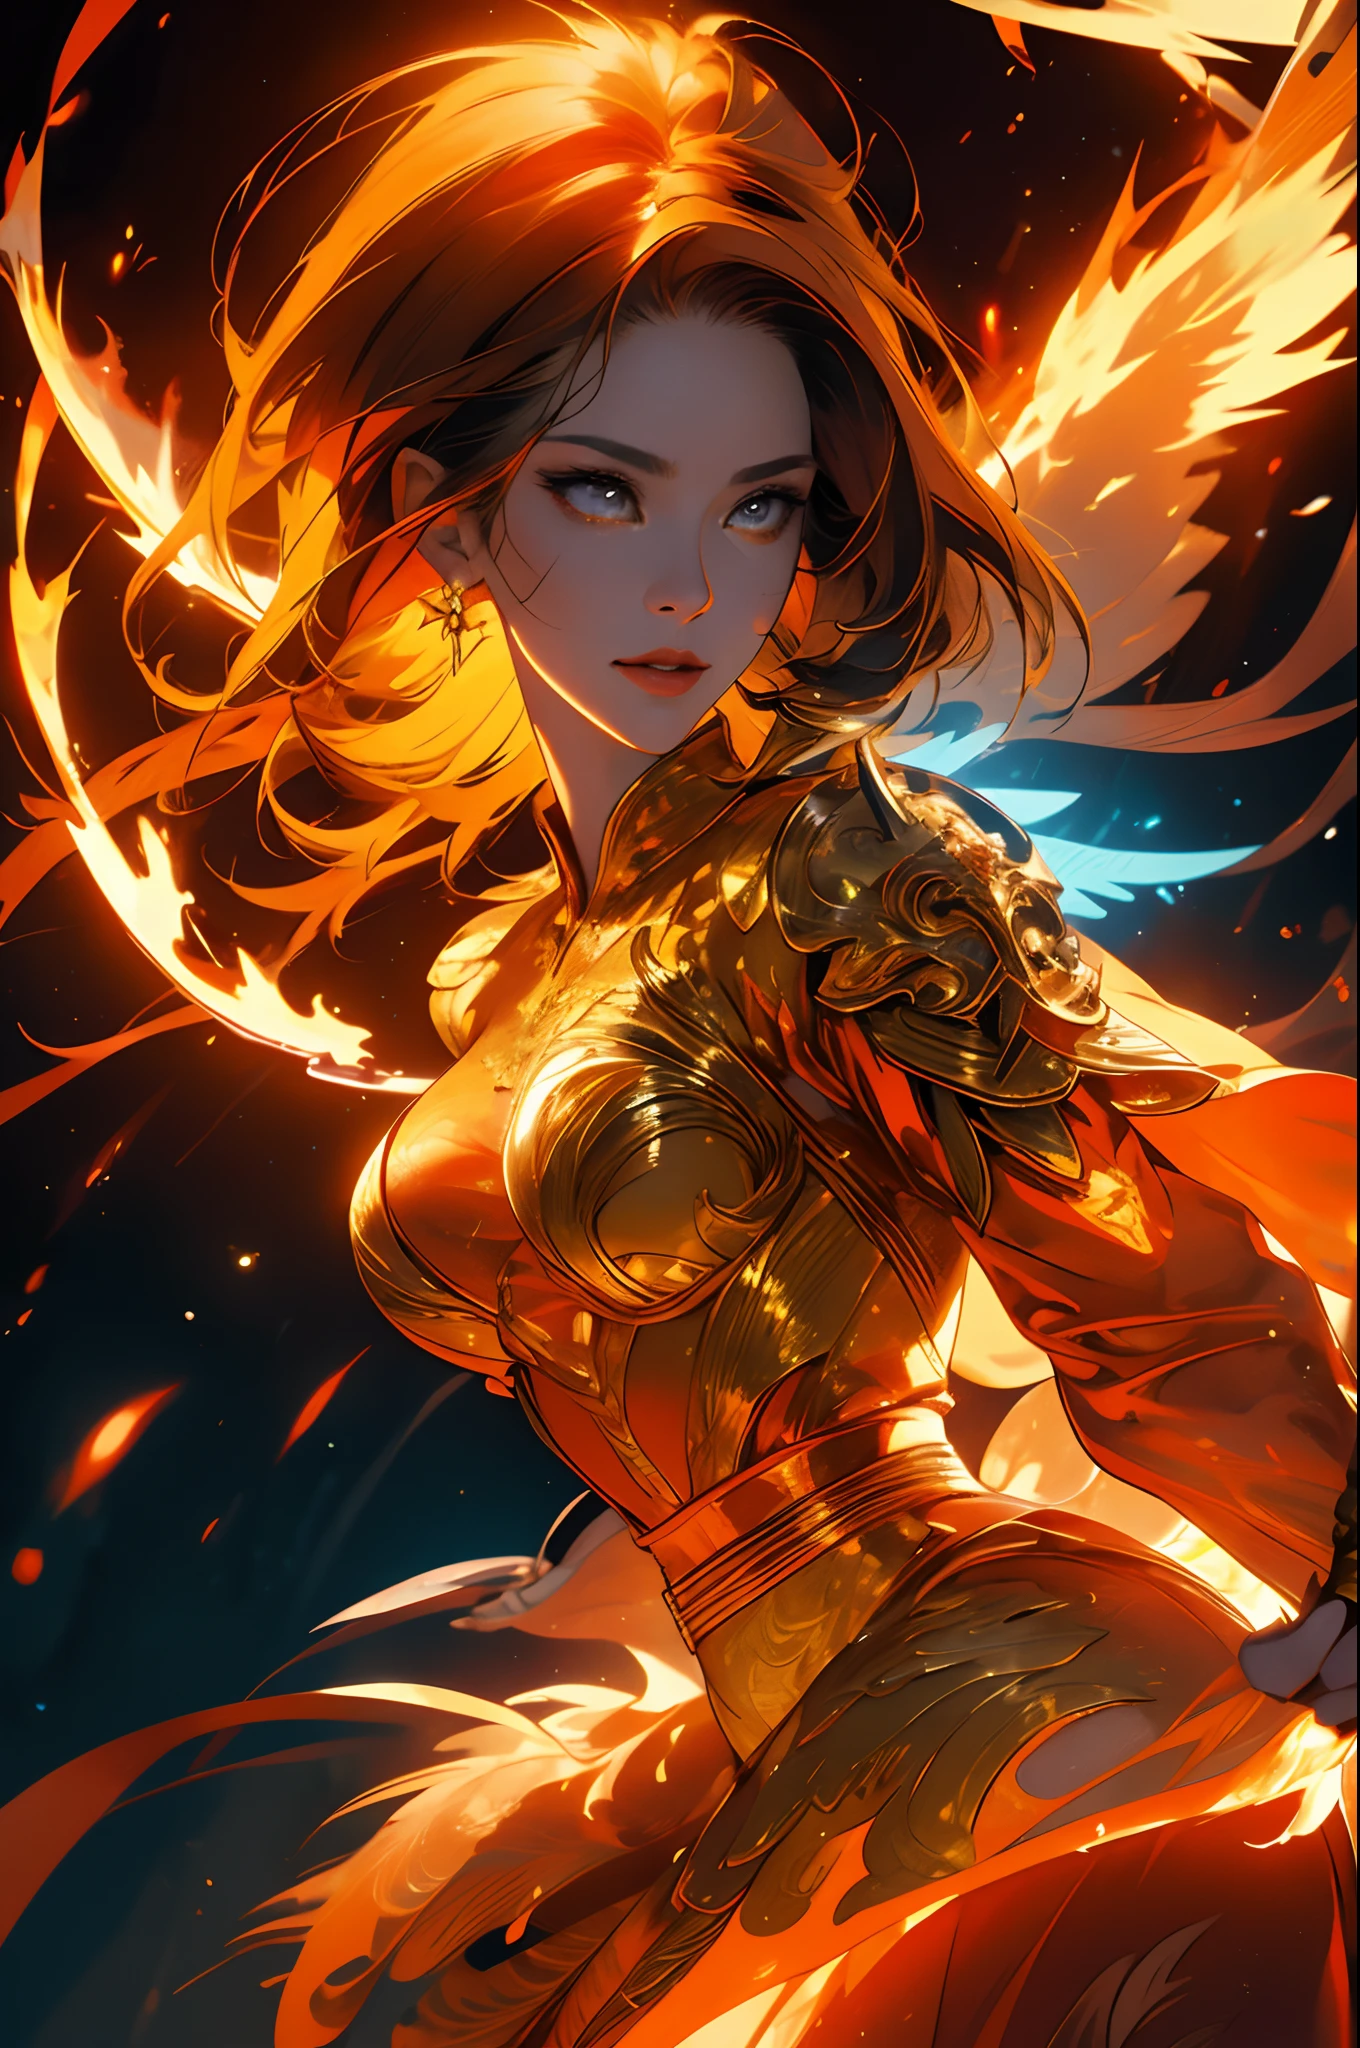 A closeup of a woman，There is fire and flame on the body, with fiery golden wings of flame, with fiery golden wings, Epic fantasy art style, concept-art | Art germ, phoenix warrior, Extremely detailed Artgerm, Epic fantasy digital art style, female lord of change, full portrait of elementalist, epic exquisite  character art